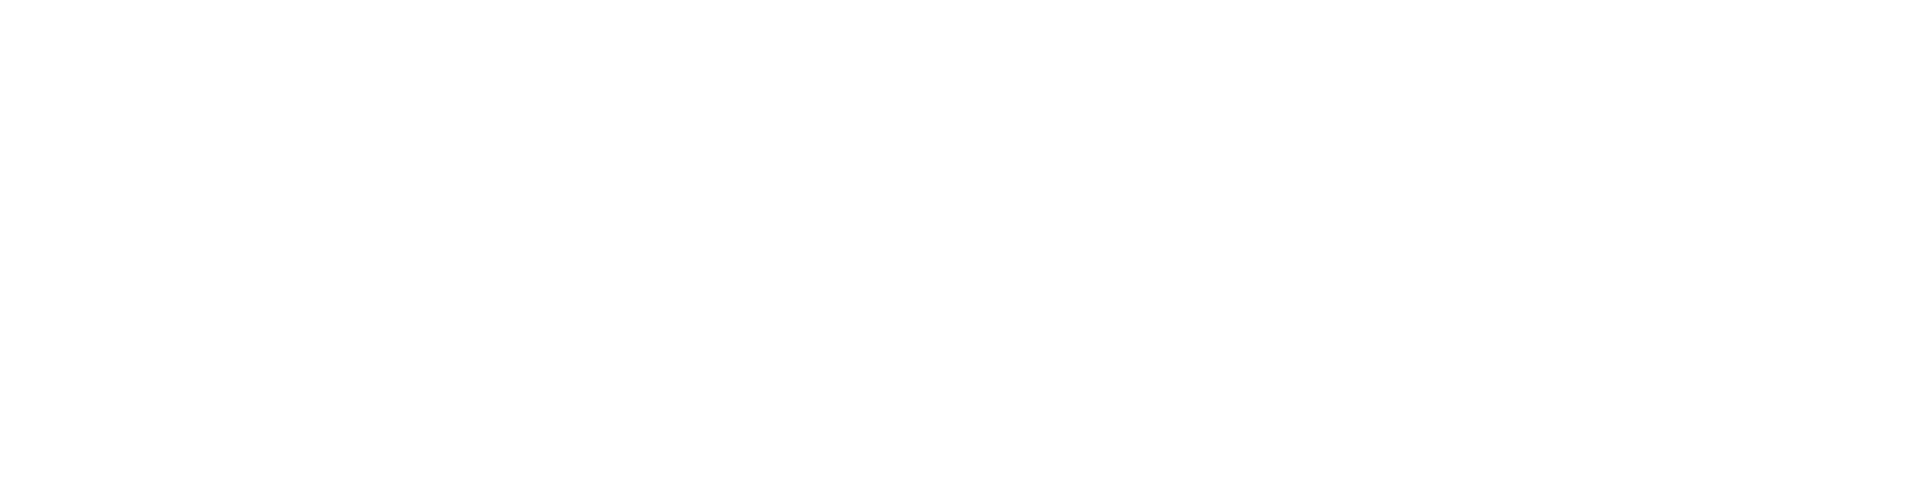 Swimsuit Madness